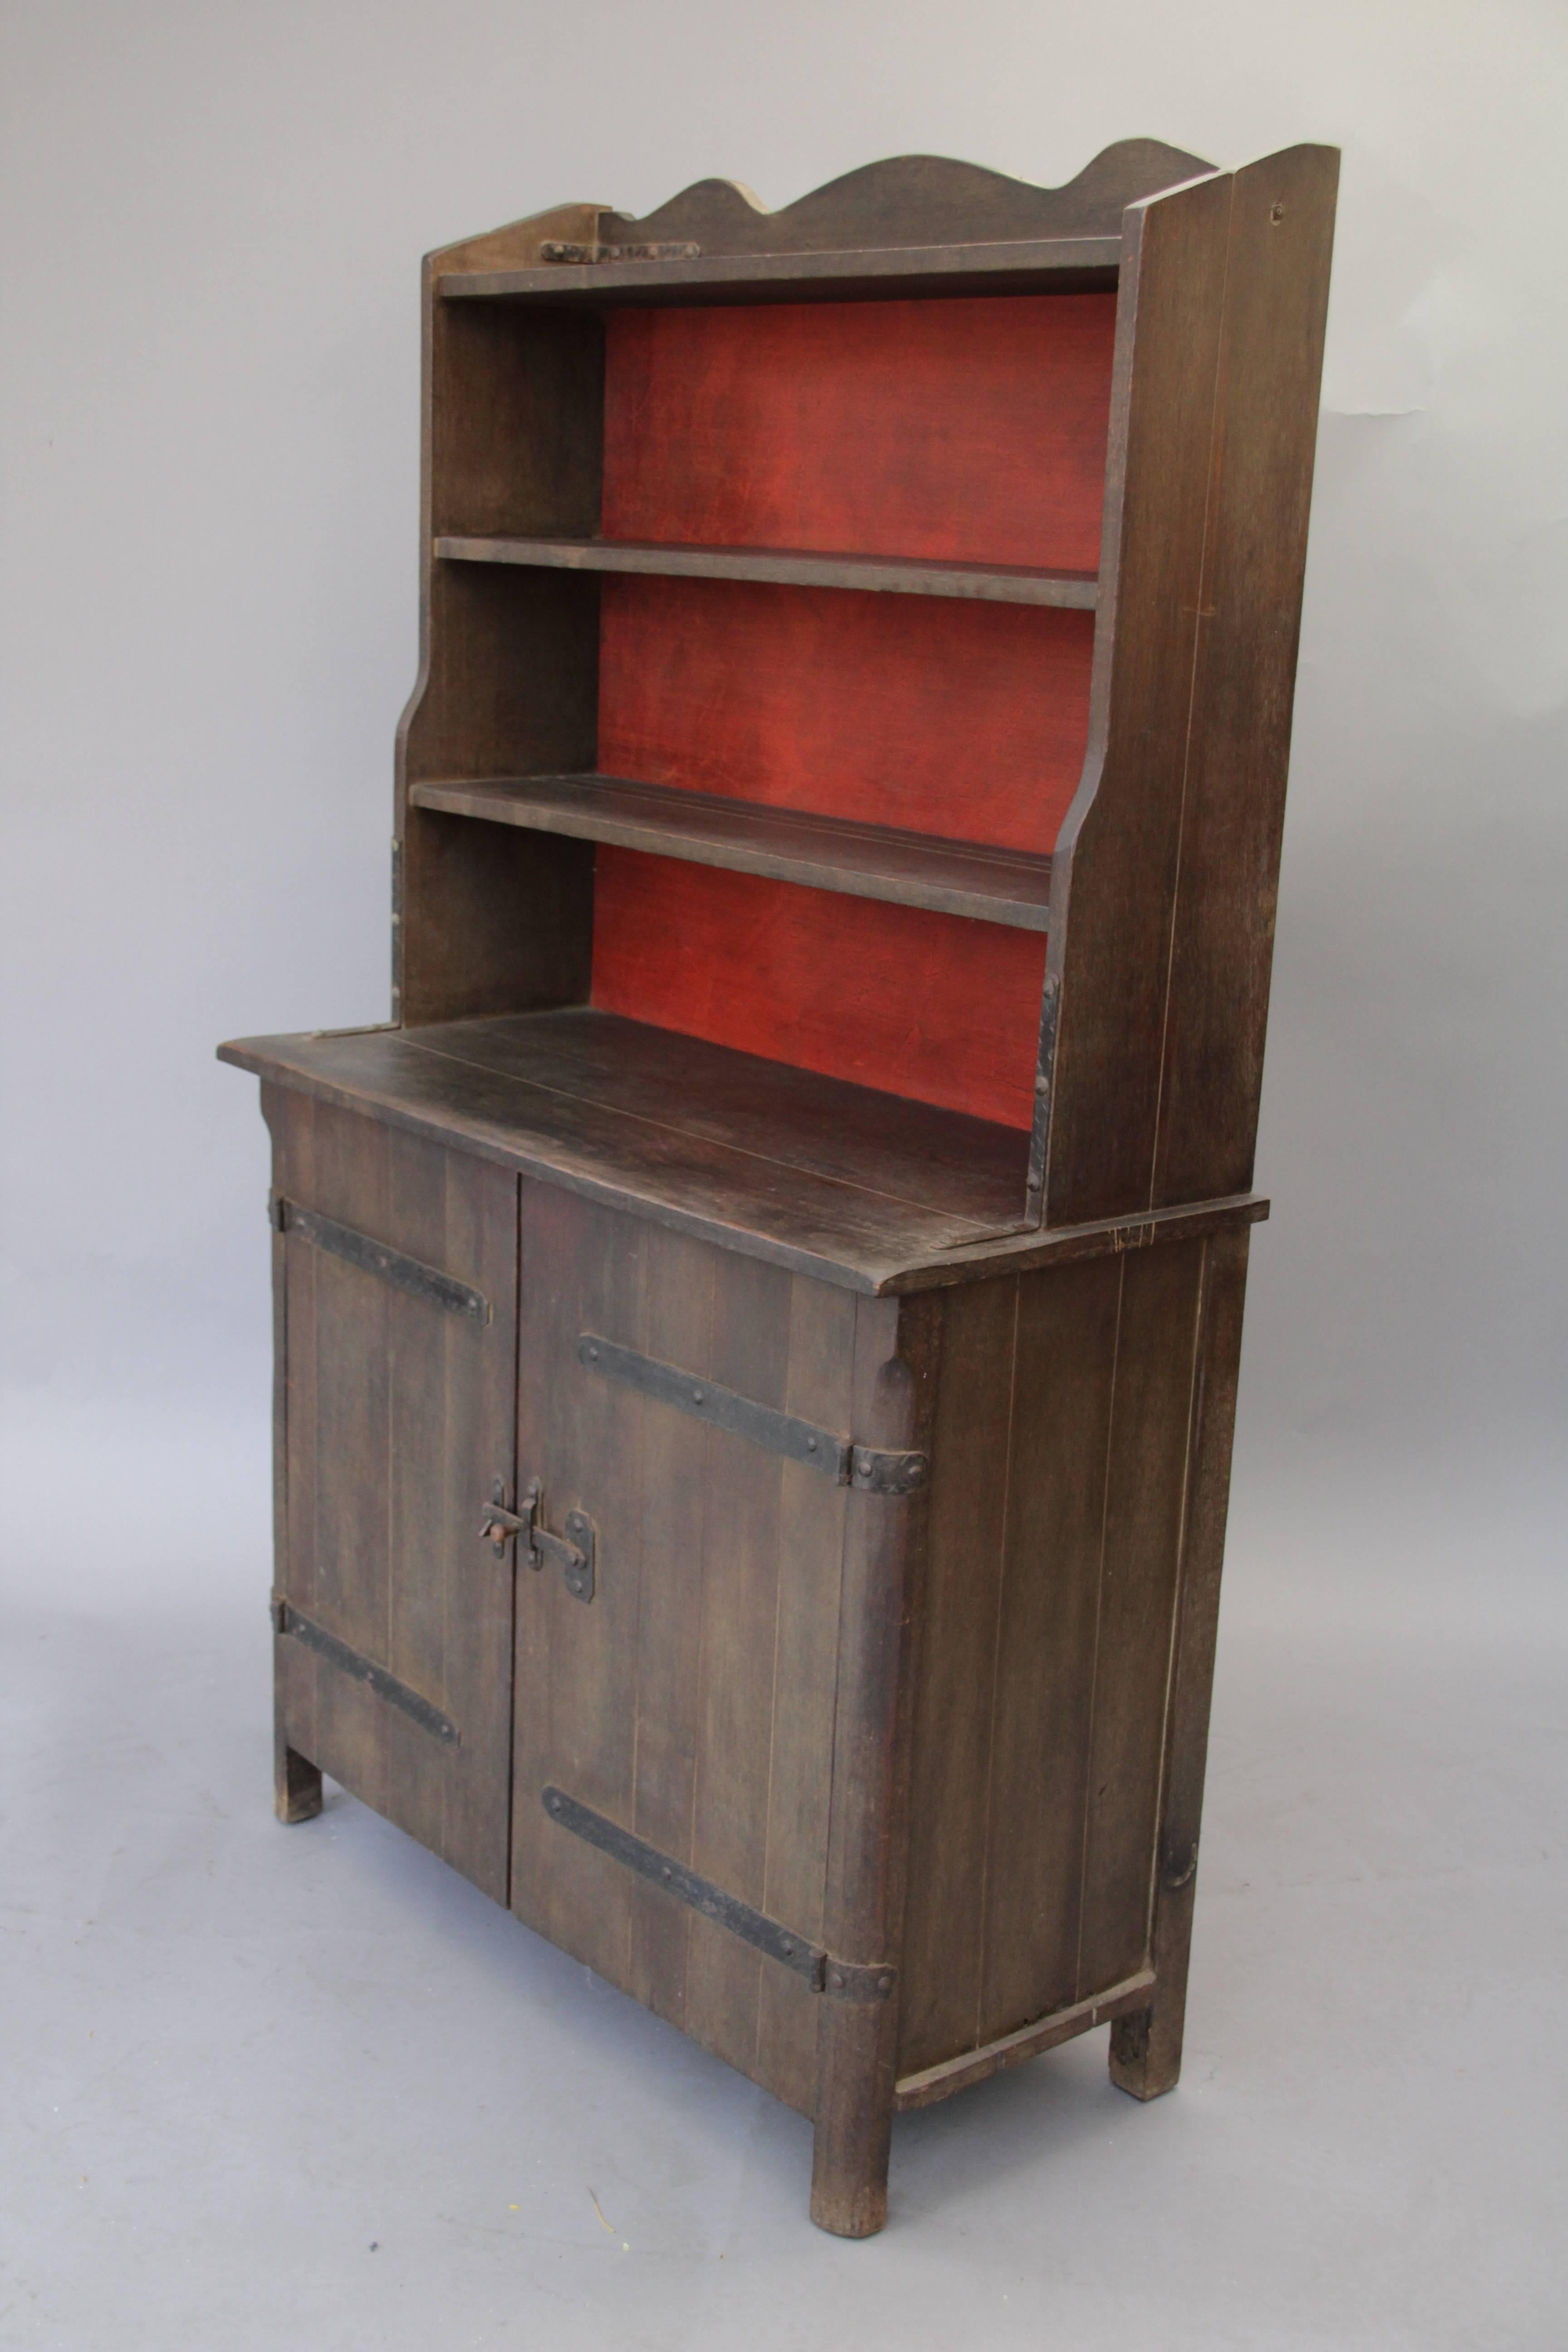 Rancho Monterey 1930s Early Monterey Signed Hutch with Original Red and Old Wood Finish